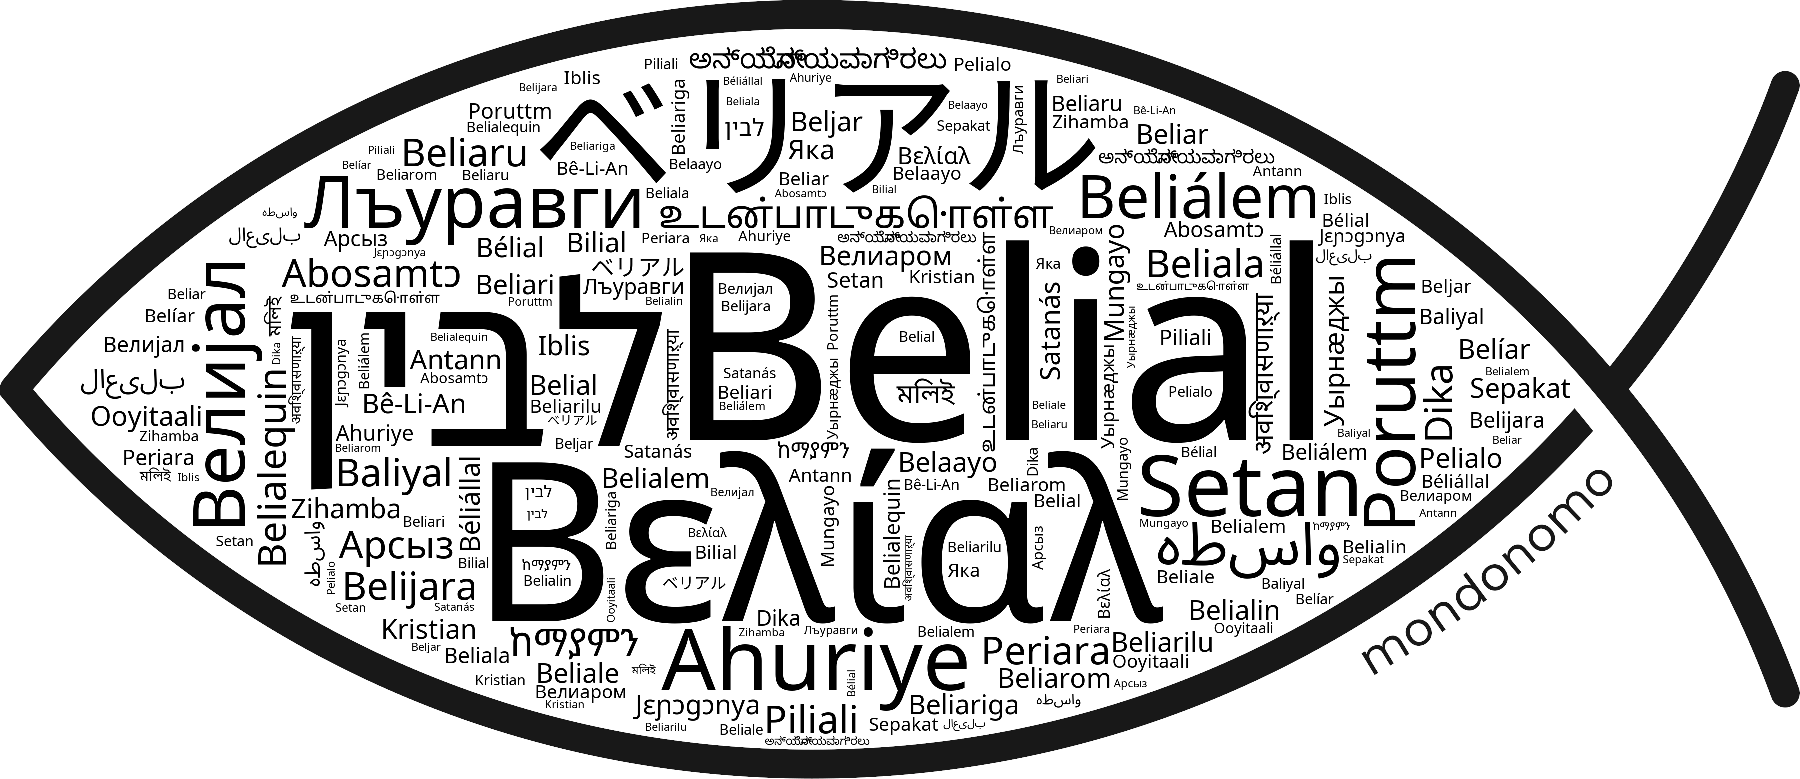 Name Belial in the world's Bibles